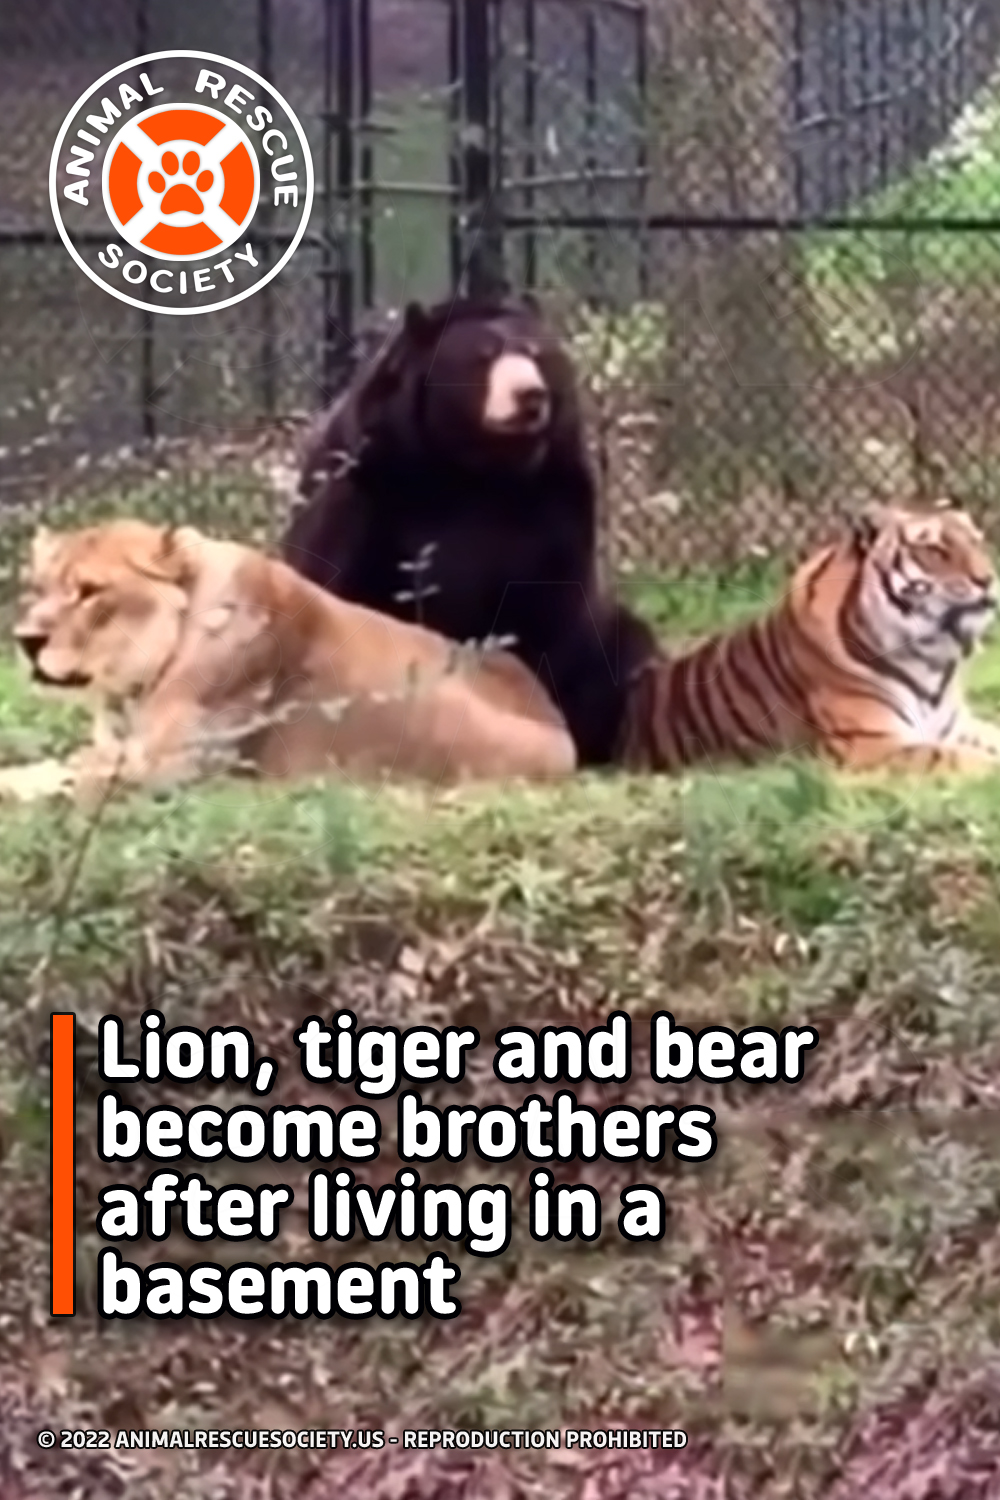 Lion, tiger and bear become brothers after living in a basement